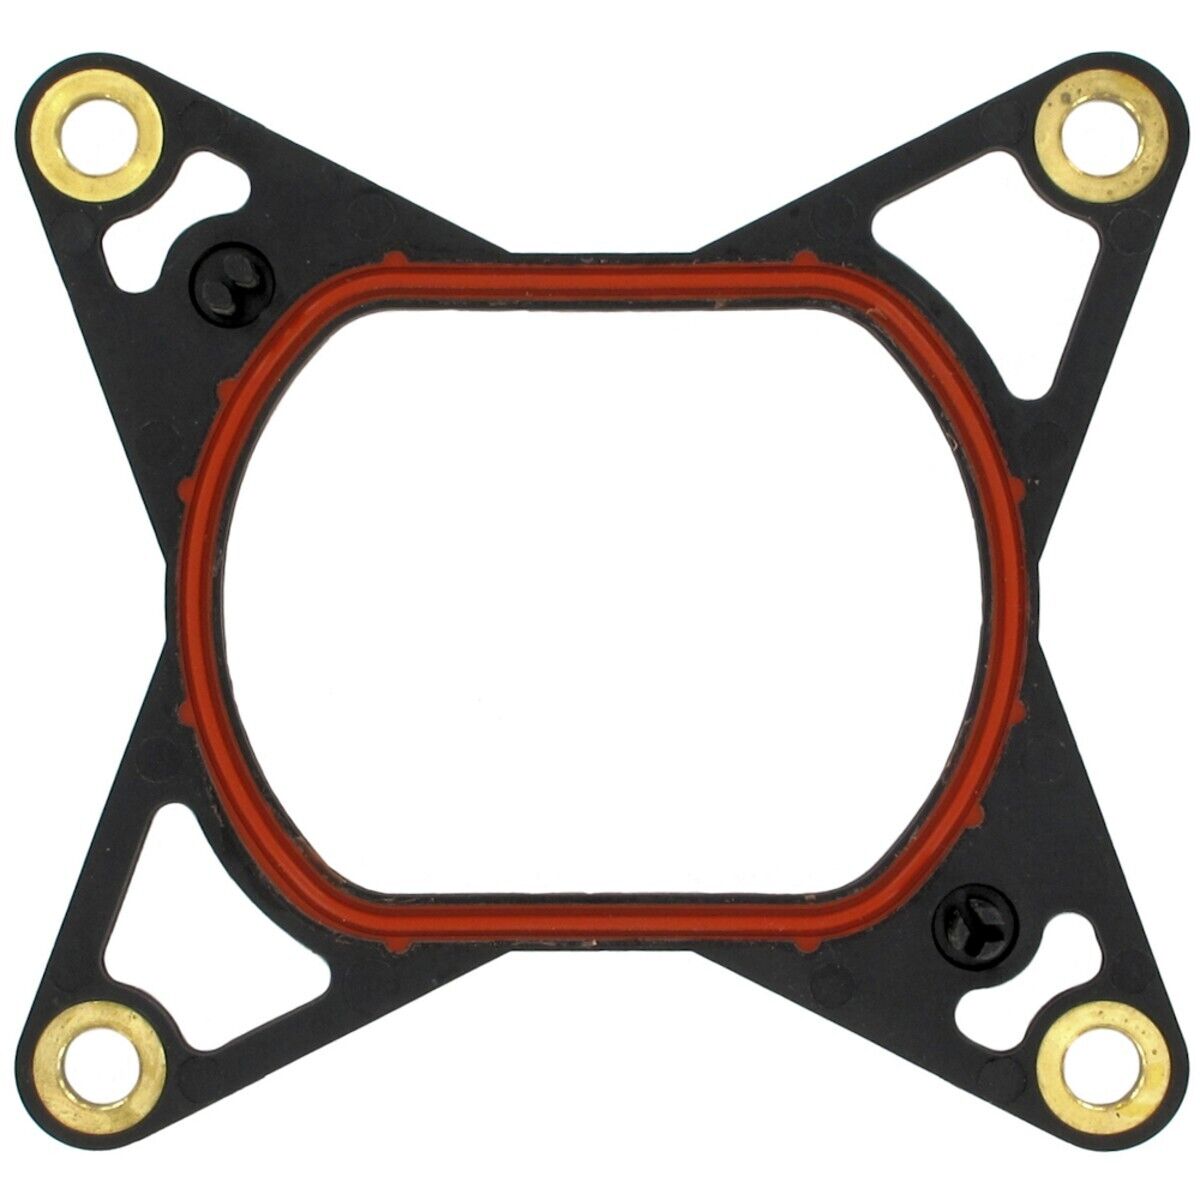 AMS4744 APEX Intake Manifold Gaskets Set for Ford Mustang Mercury Grand Marquis